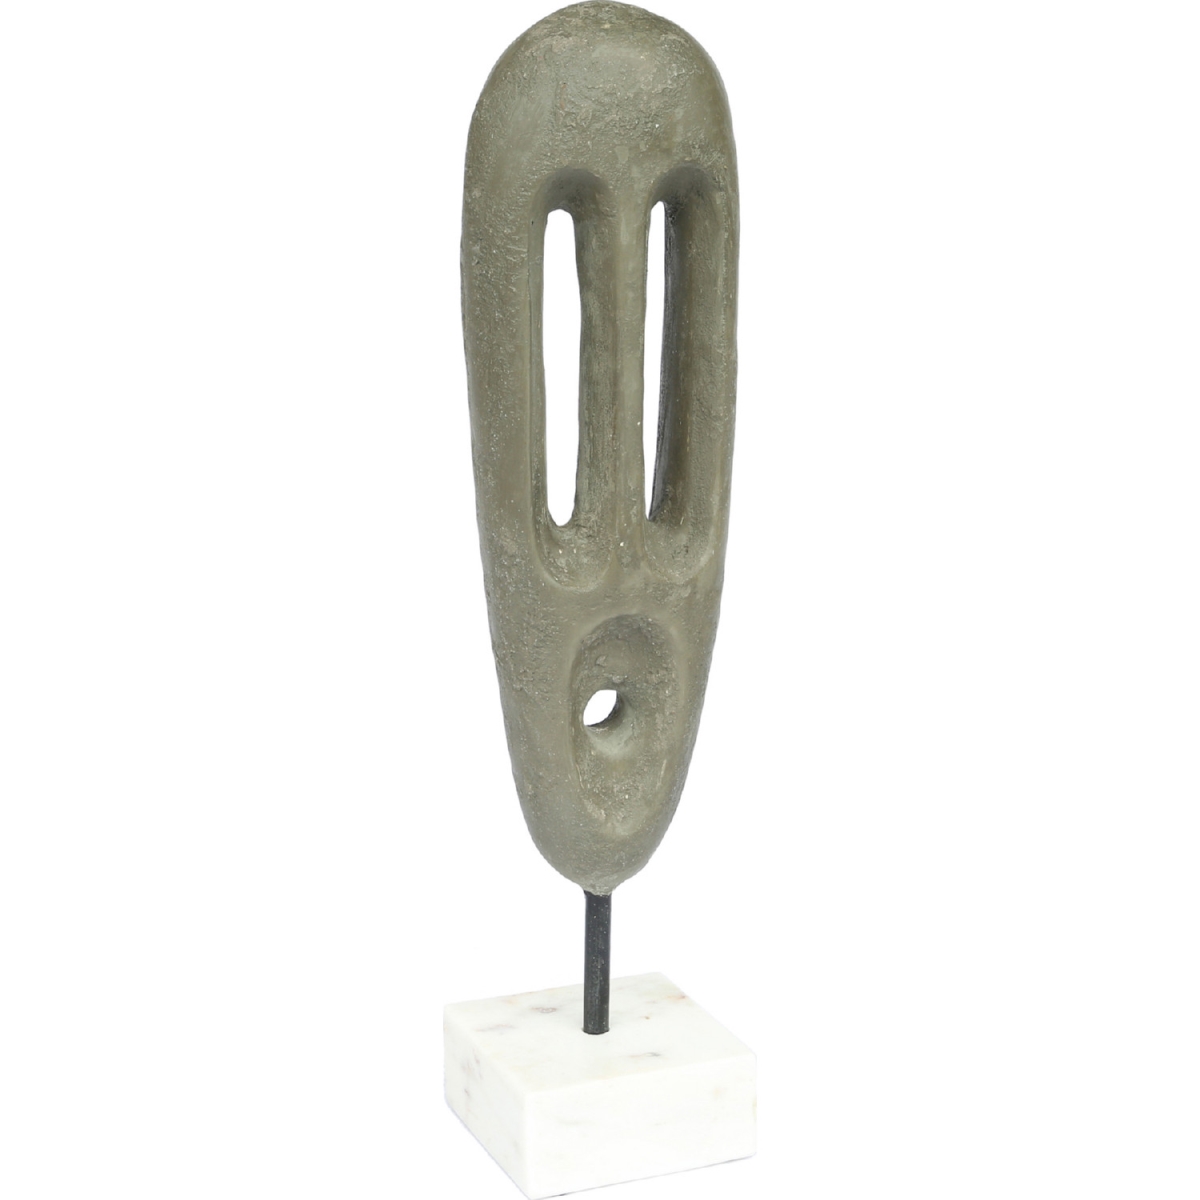 Dd-1023-29 Ecomix Mask On A Stand Sculptures - Light Grey, 20 X 5 X 4.5 In.